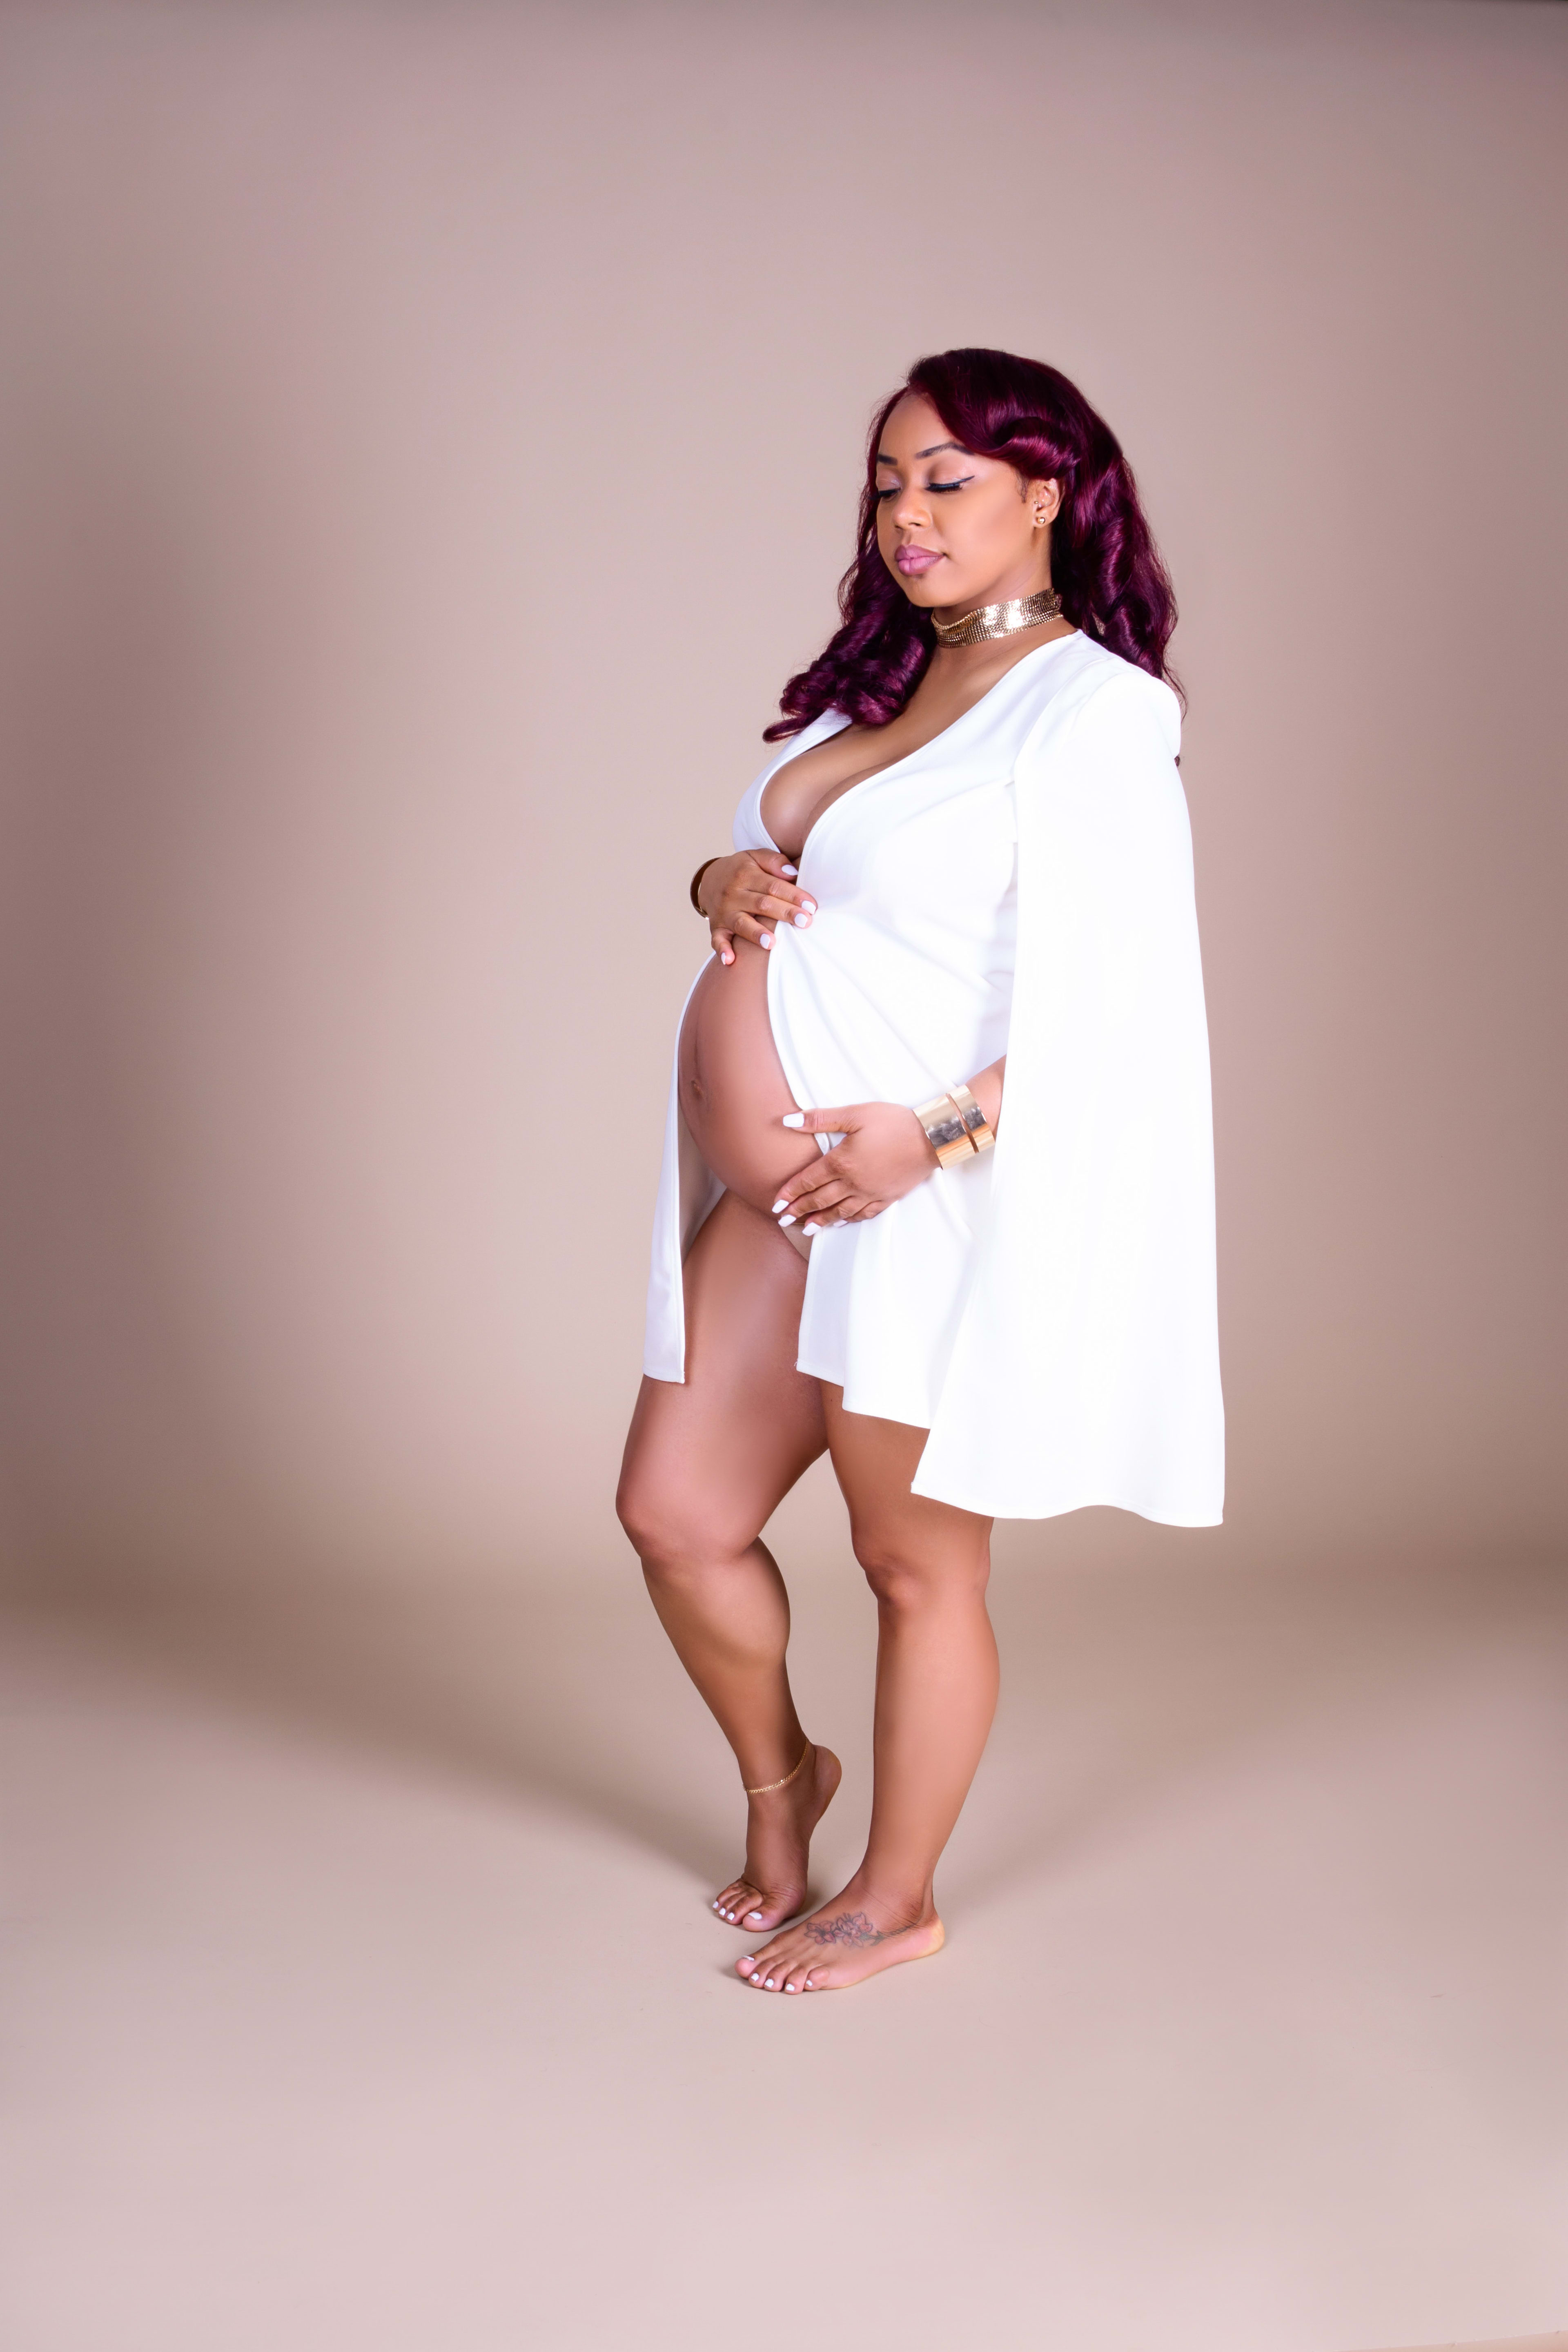 A pregnant woman in a white dress posing for a maternity photoshoot.